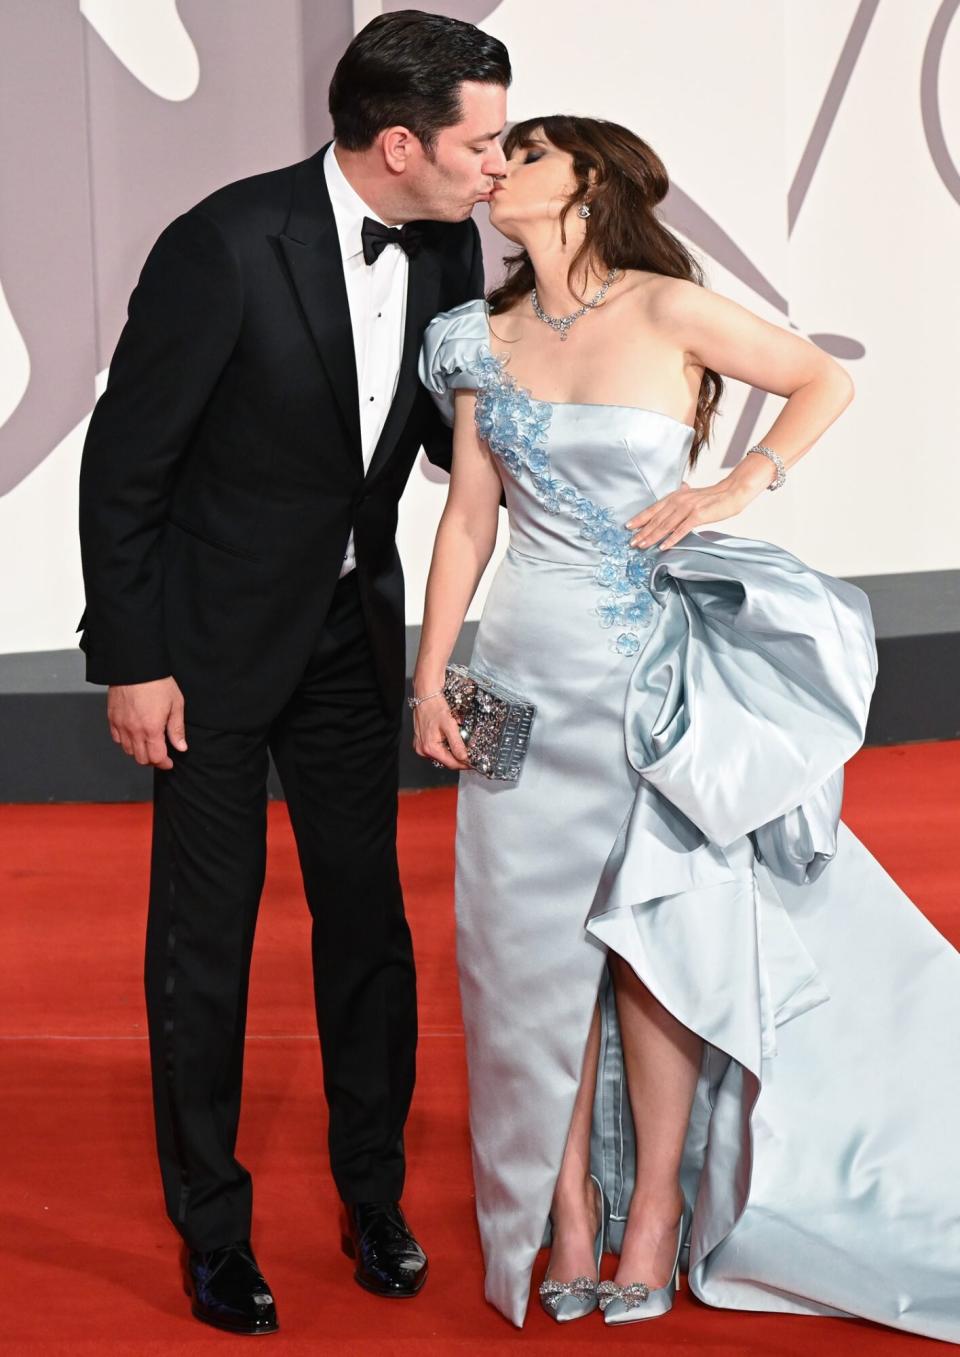 Jonathan Scott and Zooey Deschanel attend the "Dreamin' Wild" red carpet at the 79th Venice International Film Festival